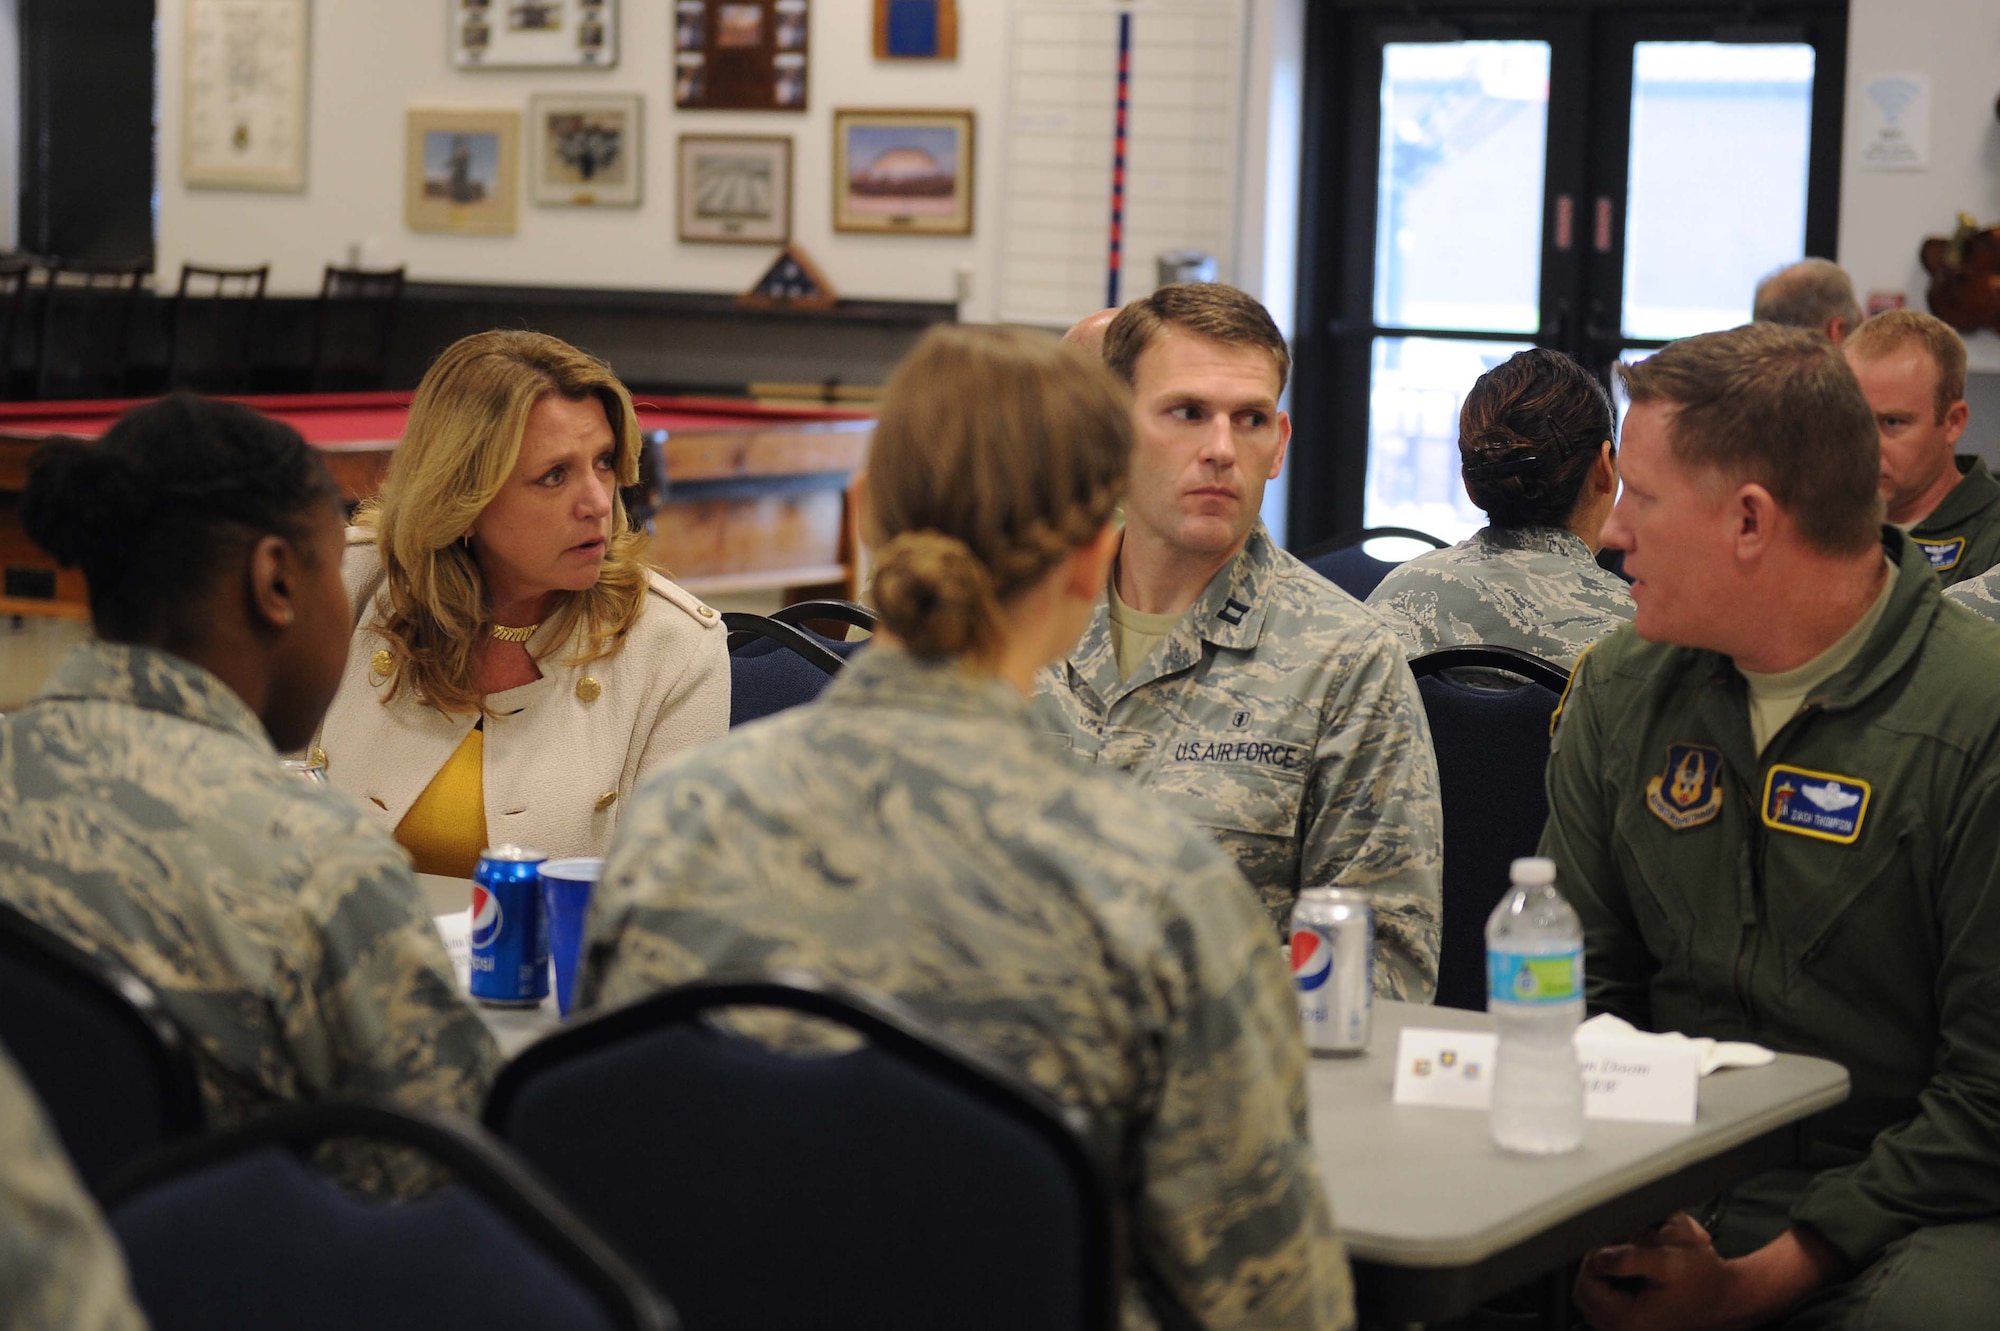 Secretary of the Air Force Deborah Lee James has lunch with Airmen, July 29, 2016, at McConnell Air Force Base, Kan. The lunch was one of several events in which James interacted with Airmen while at McConnell. (U.S. Air Force photo/Senior Airman Tara Fadenrecht)